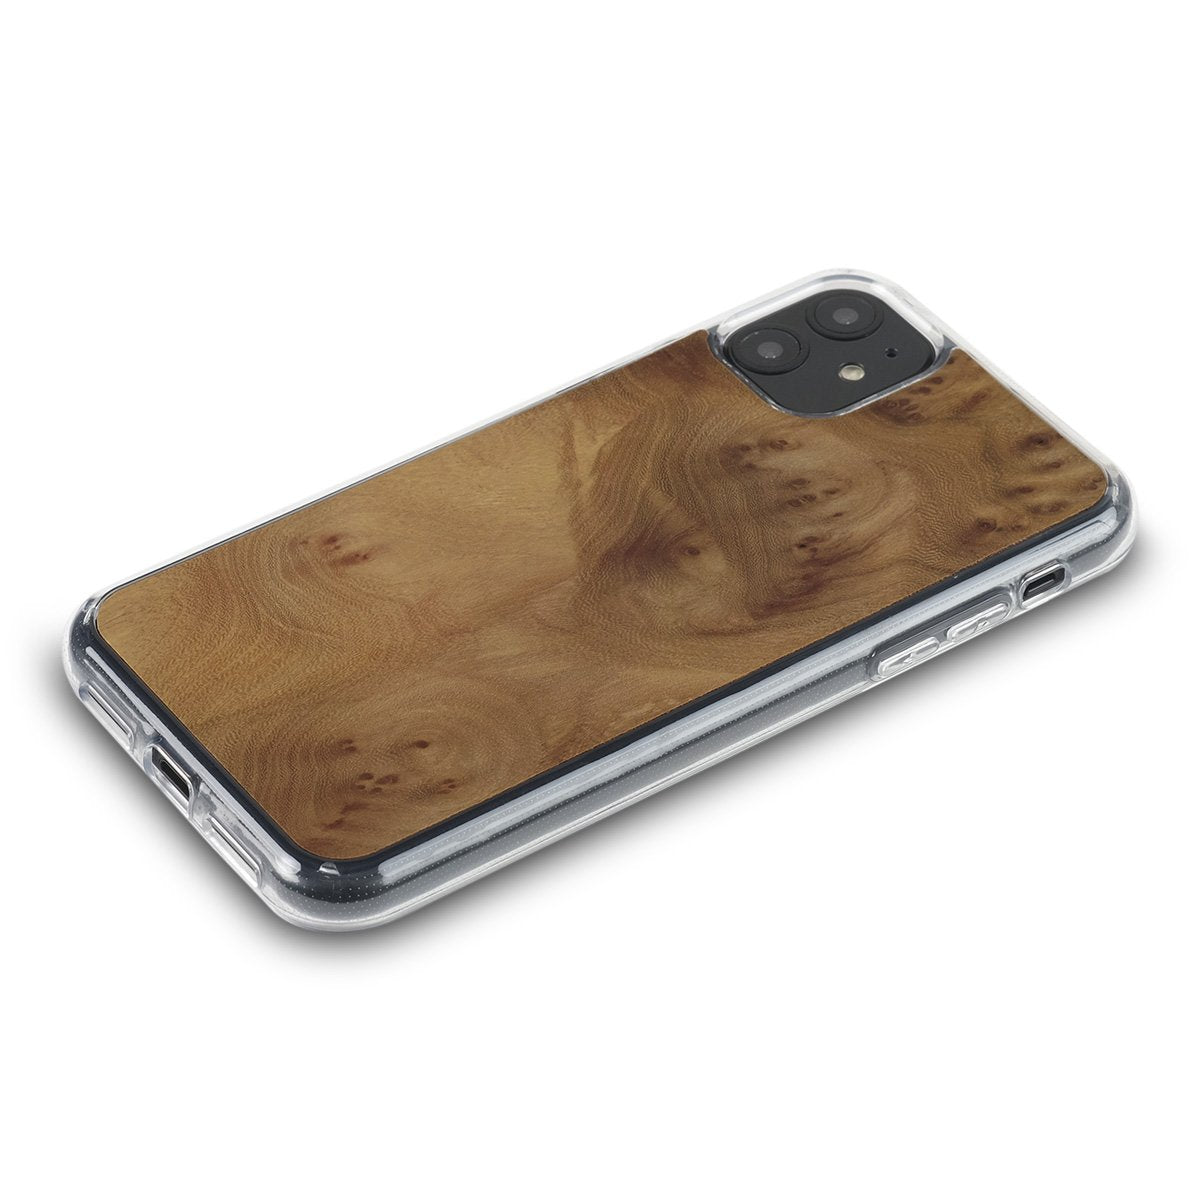 iPhone 11 Pro Max —  #WoodBack Explorer Clear Case